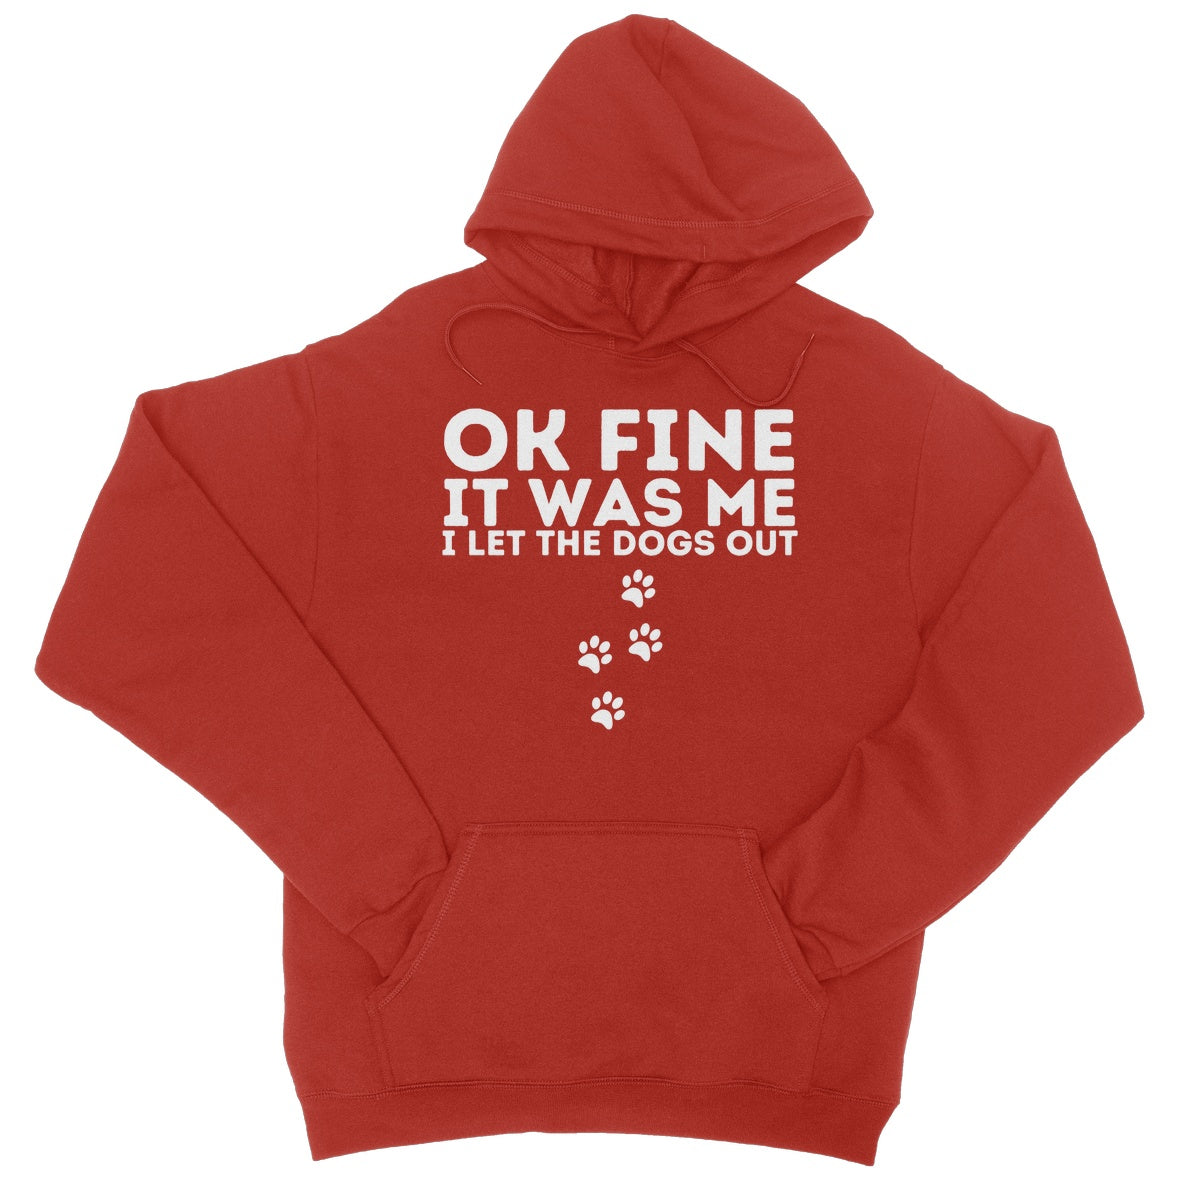 I let the dogs out hoodie red